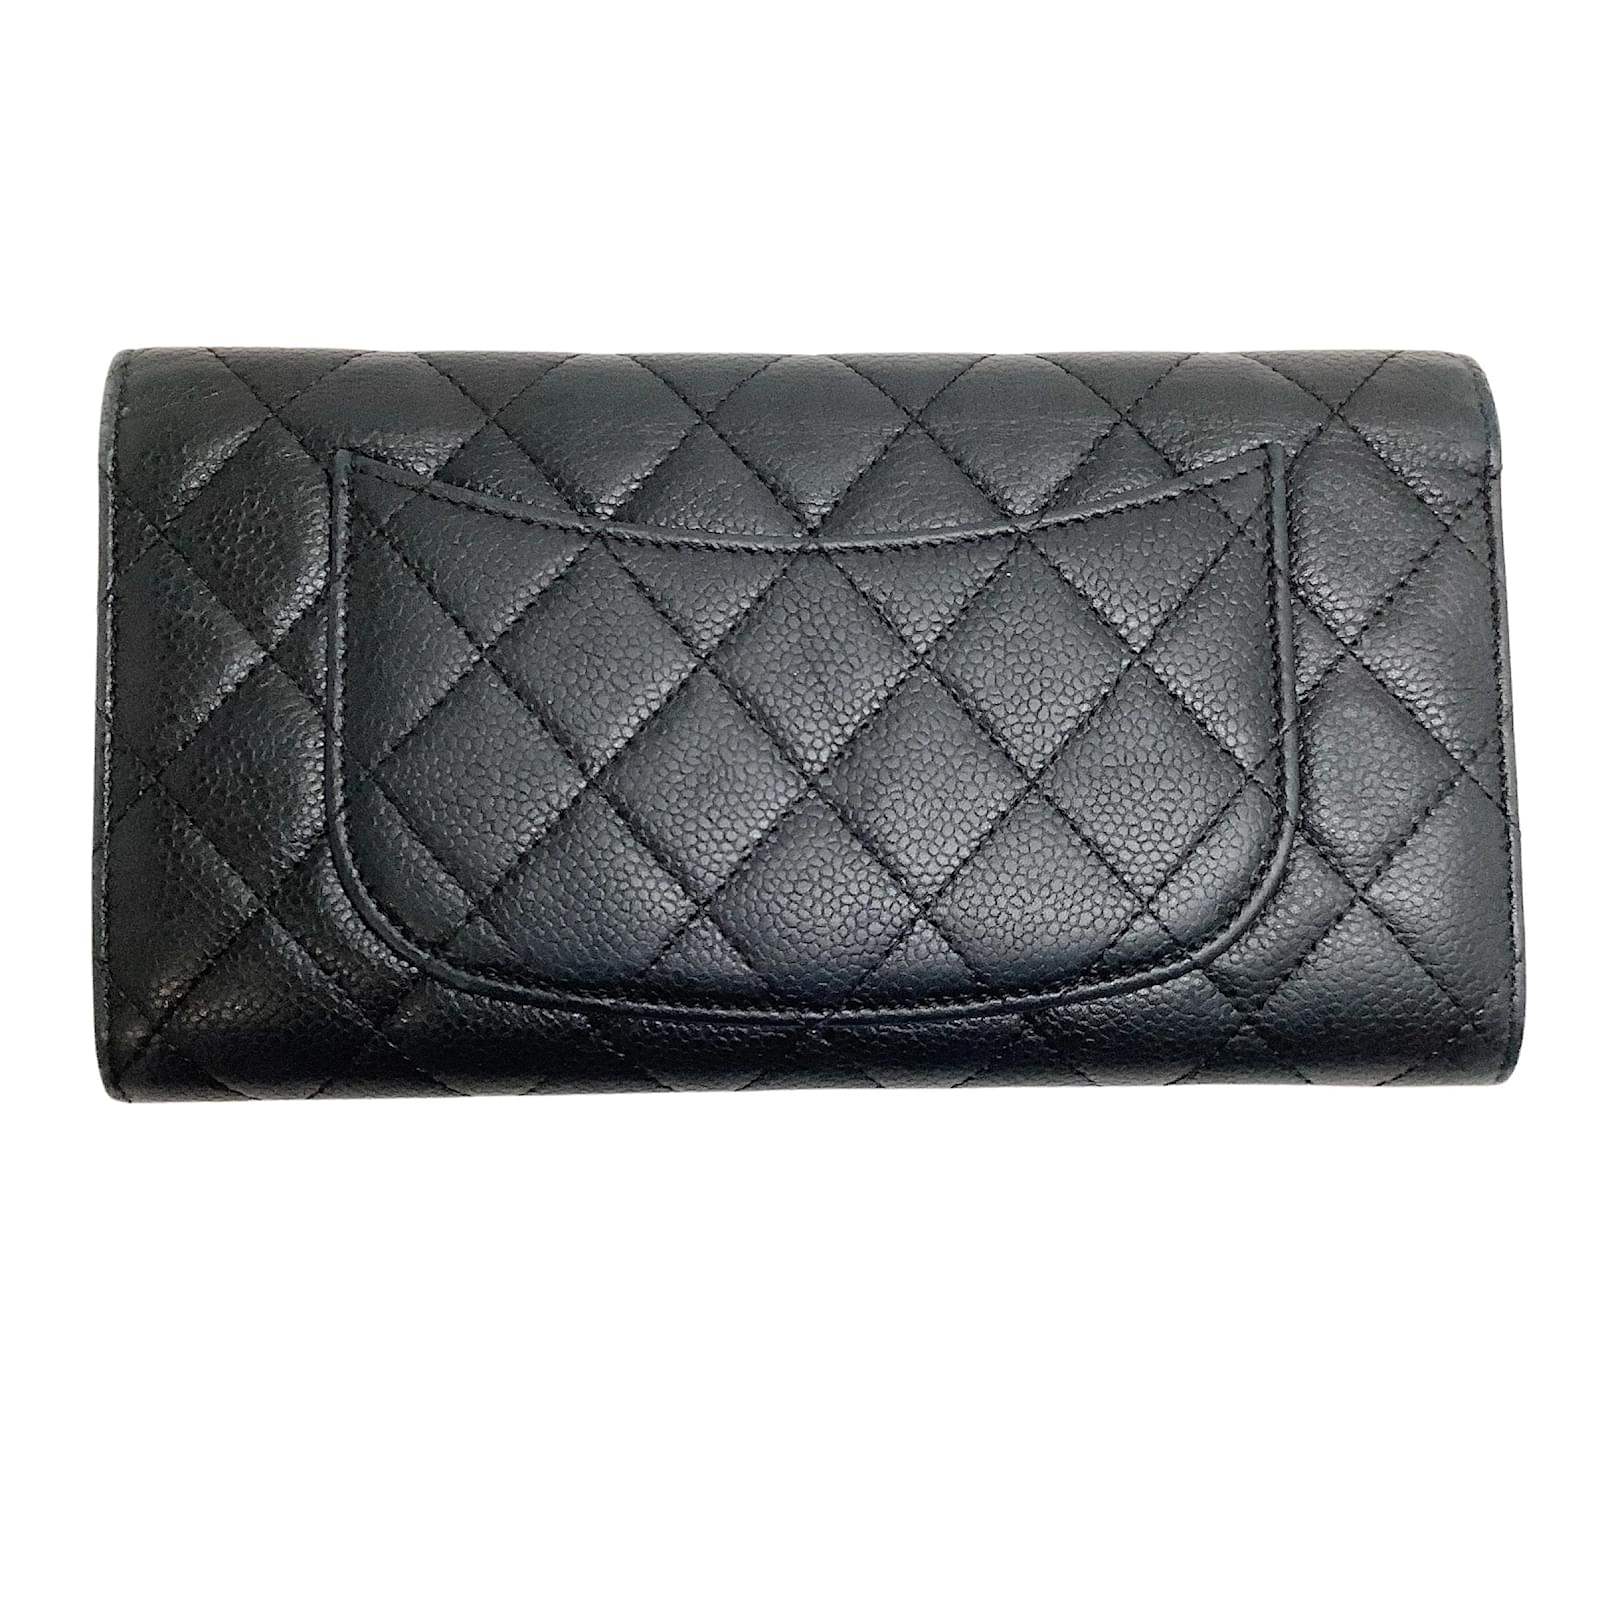 Purses, Wallets, Cases Chanel Chanel 2012 Black Caviar XL Wallet with Removeable Insert